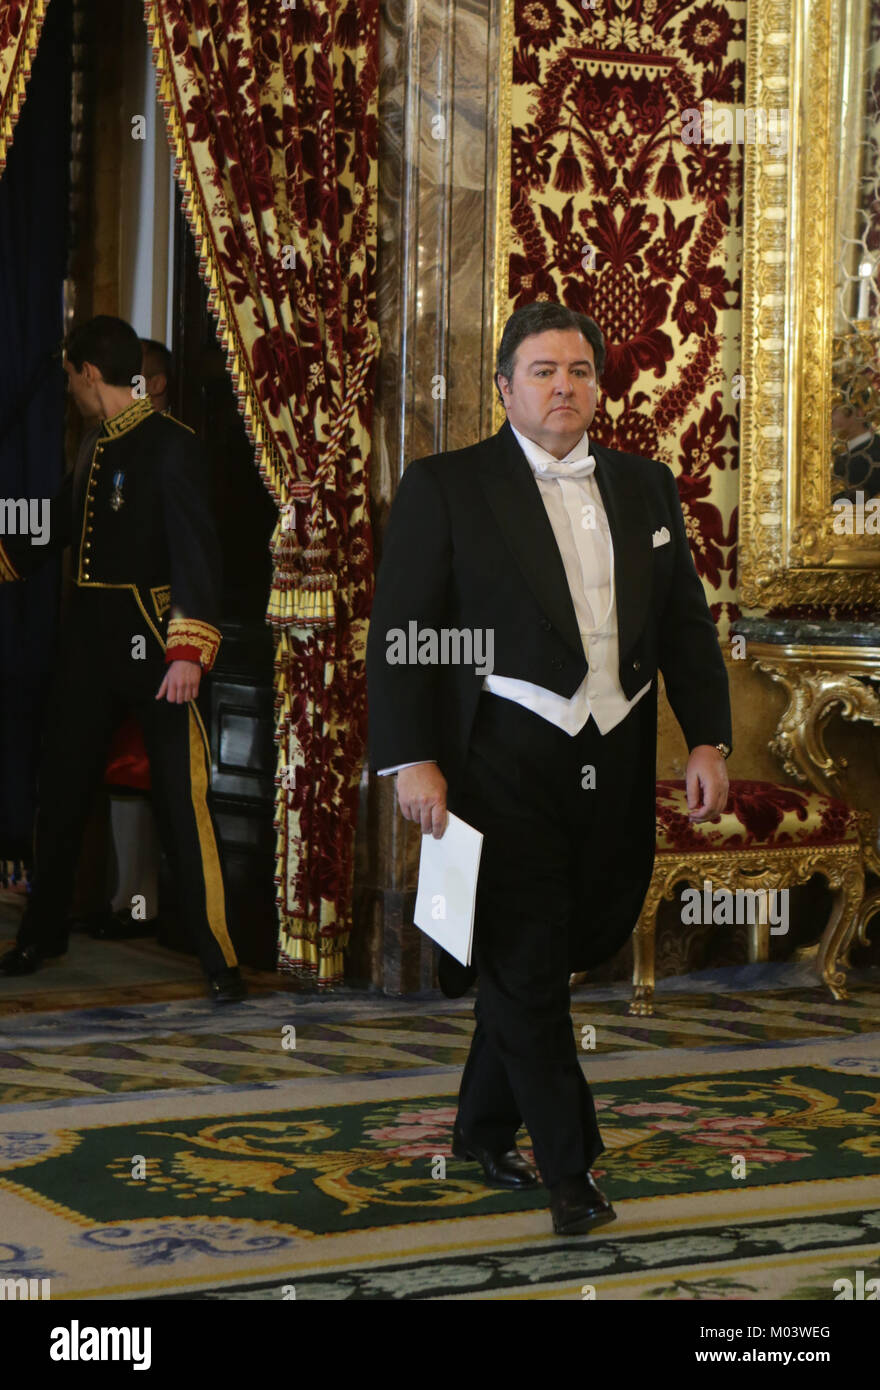 Madrid, Spain. 18th January, 2018. US Ambassador Duke Buchan the credentials in RoyalPalace of Madrid Thursday, Jan. 18, 2018. Credit: Gtres Información más Comuniación on line, S.L./Alamy Live News Stock Photo